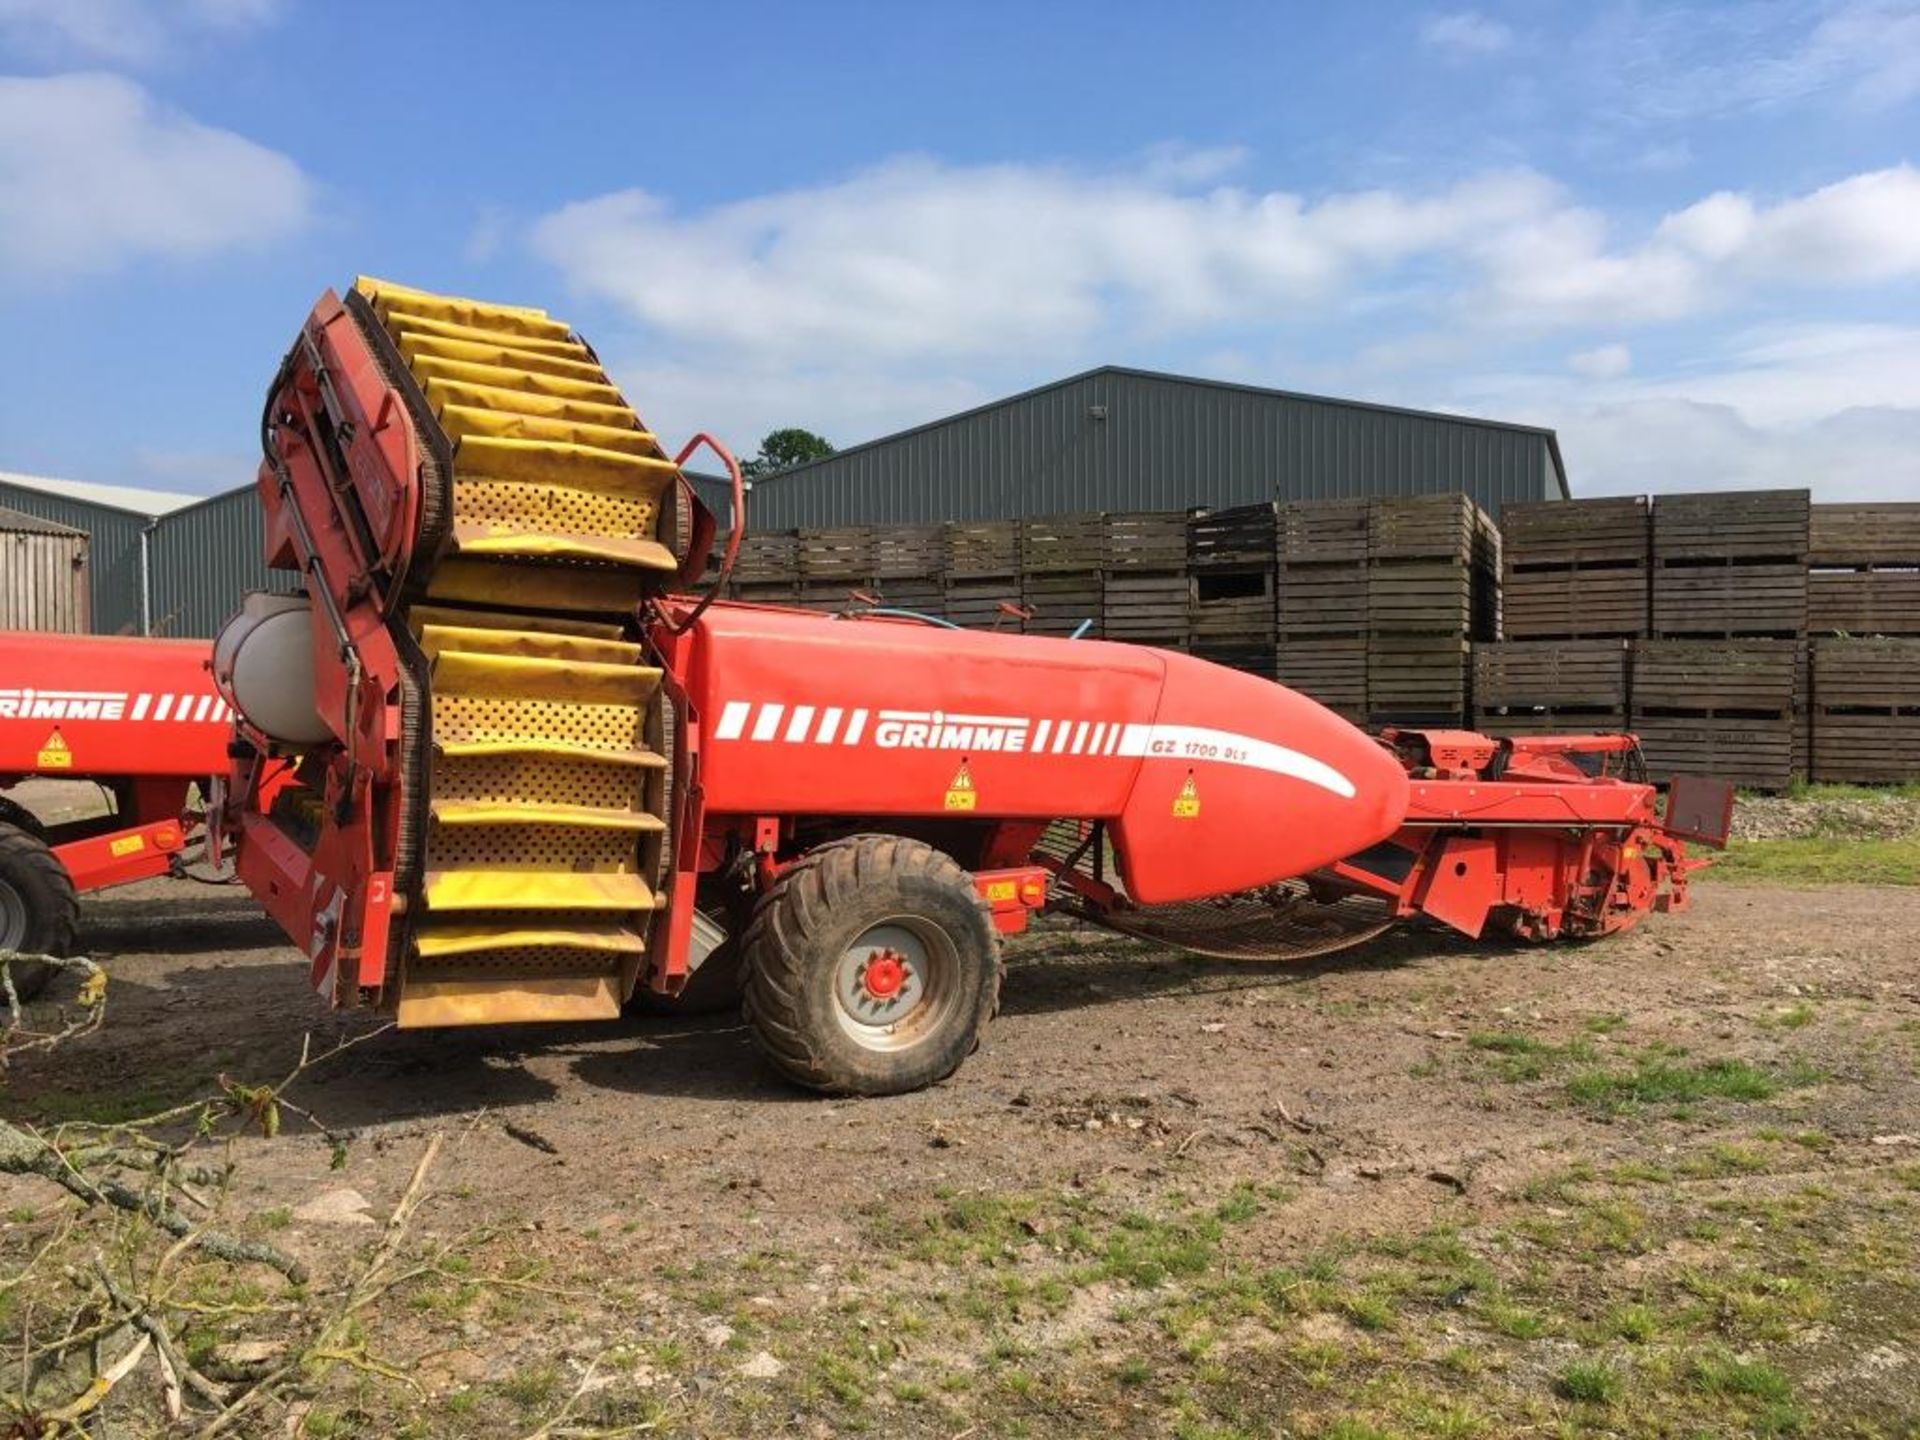 Grimme GZ 1700 two row potato harvester (no plate, advised 2002) - Image 3 of 11